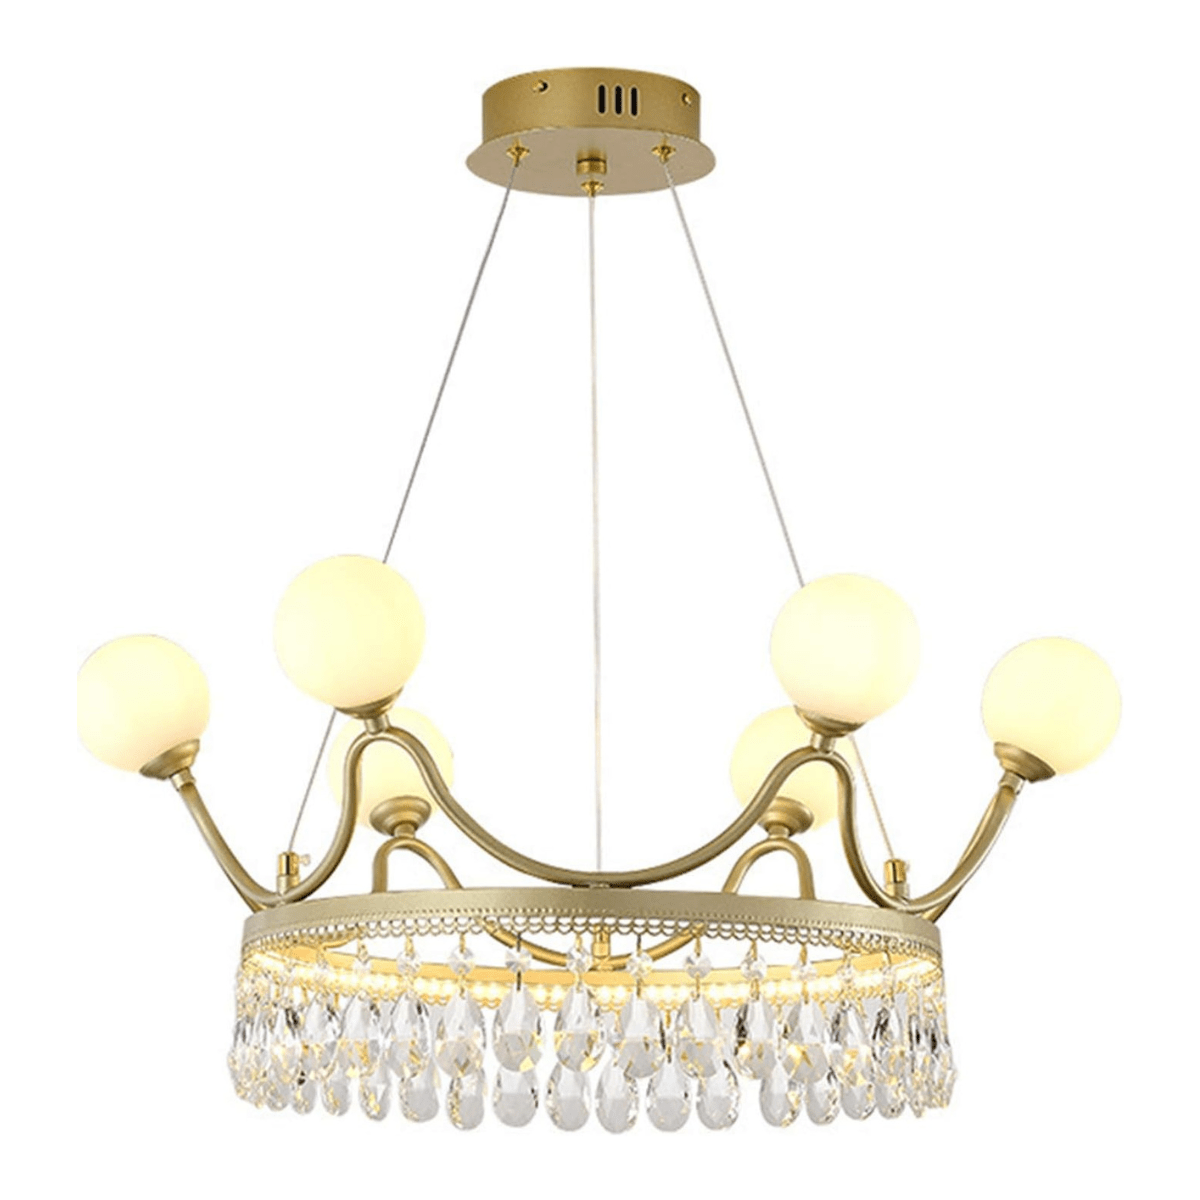 Buy Luxury Modern LED 6 Crown Crystal White Balls Ceiling Pendant Chandelier 60cm - CL-14 | Shop at Supply Master Accra, Ghana Lamps & Lightings Buy Tools hardware Building materials